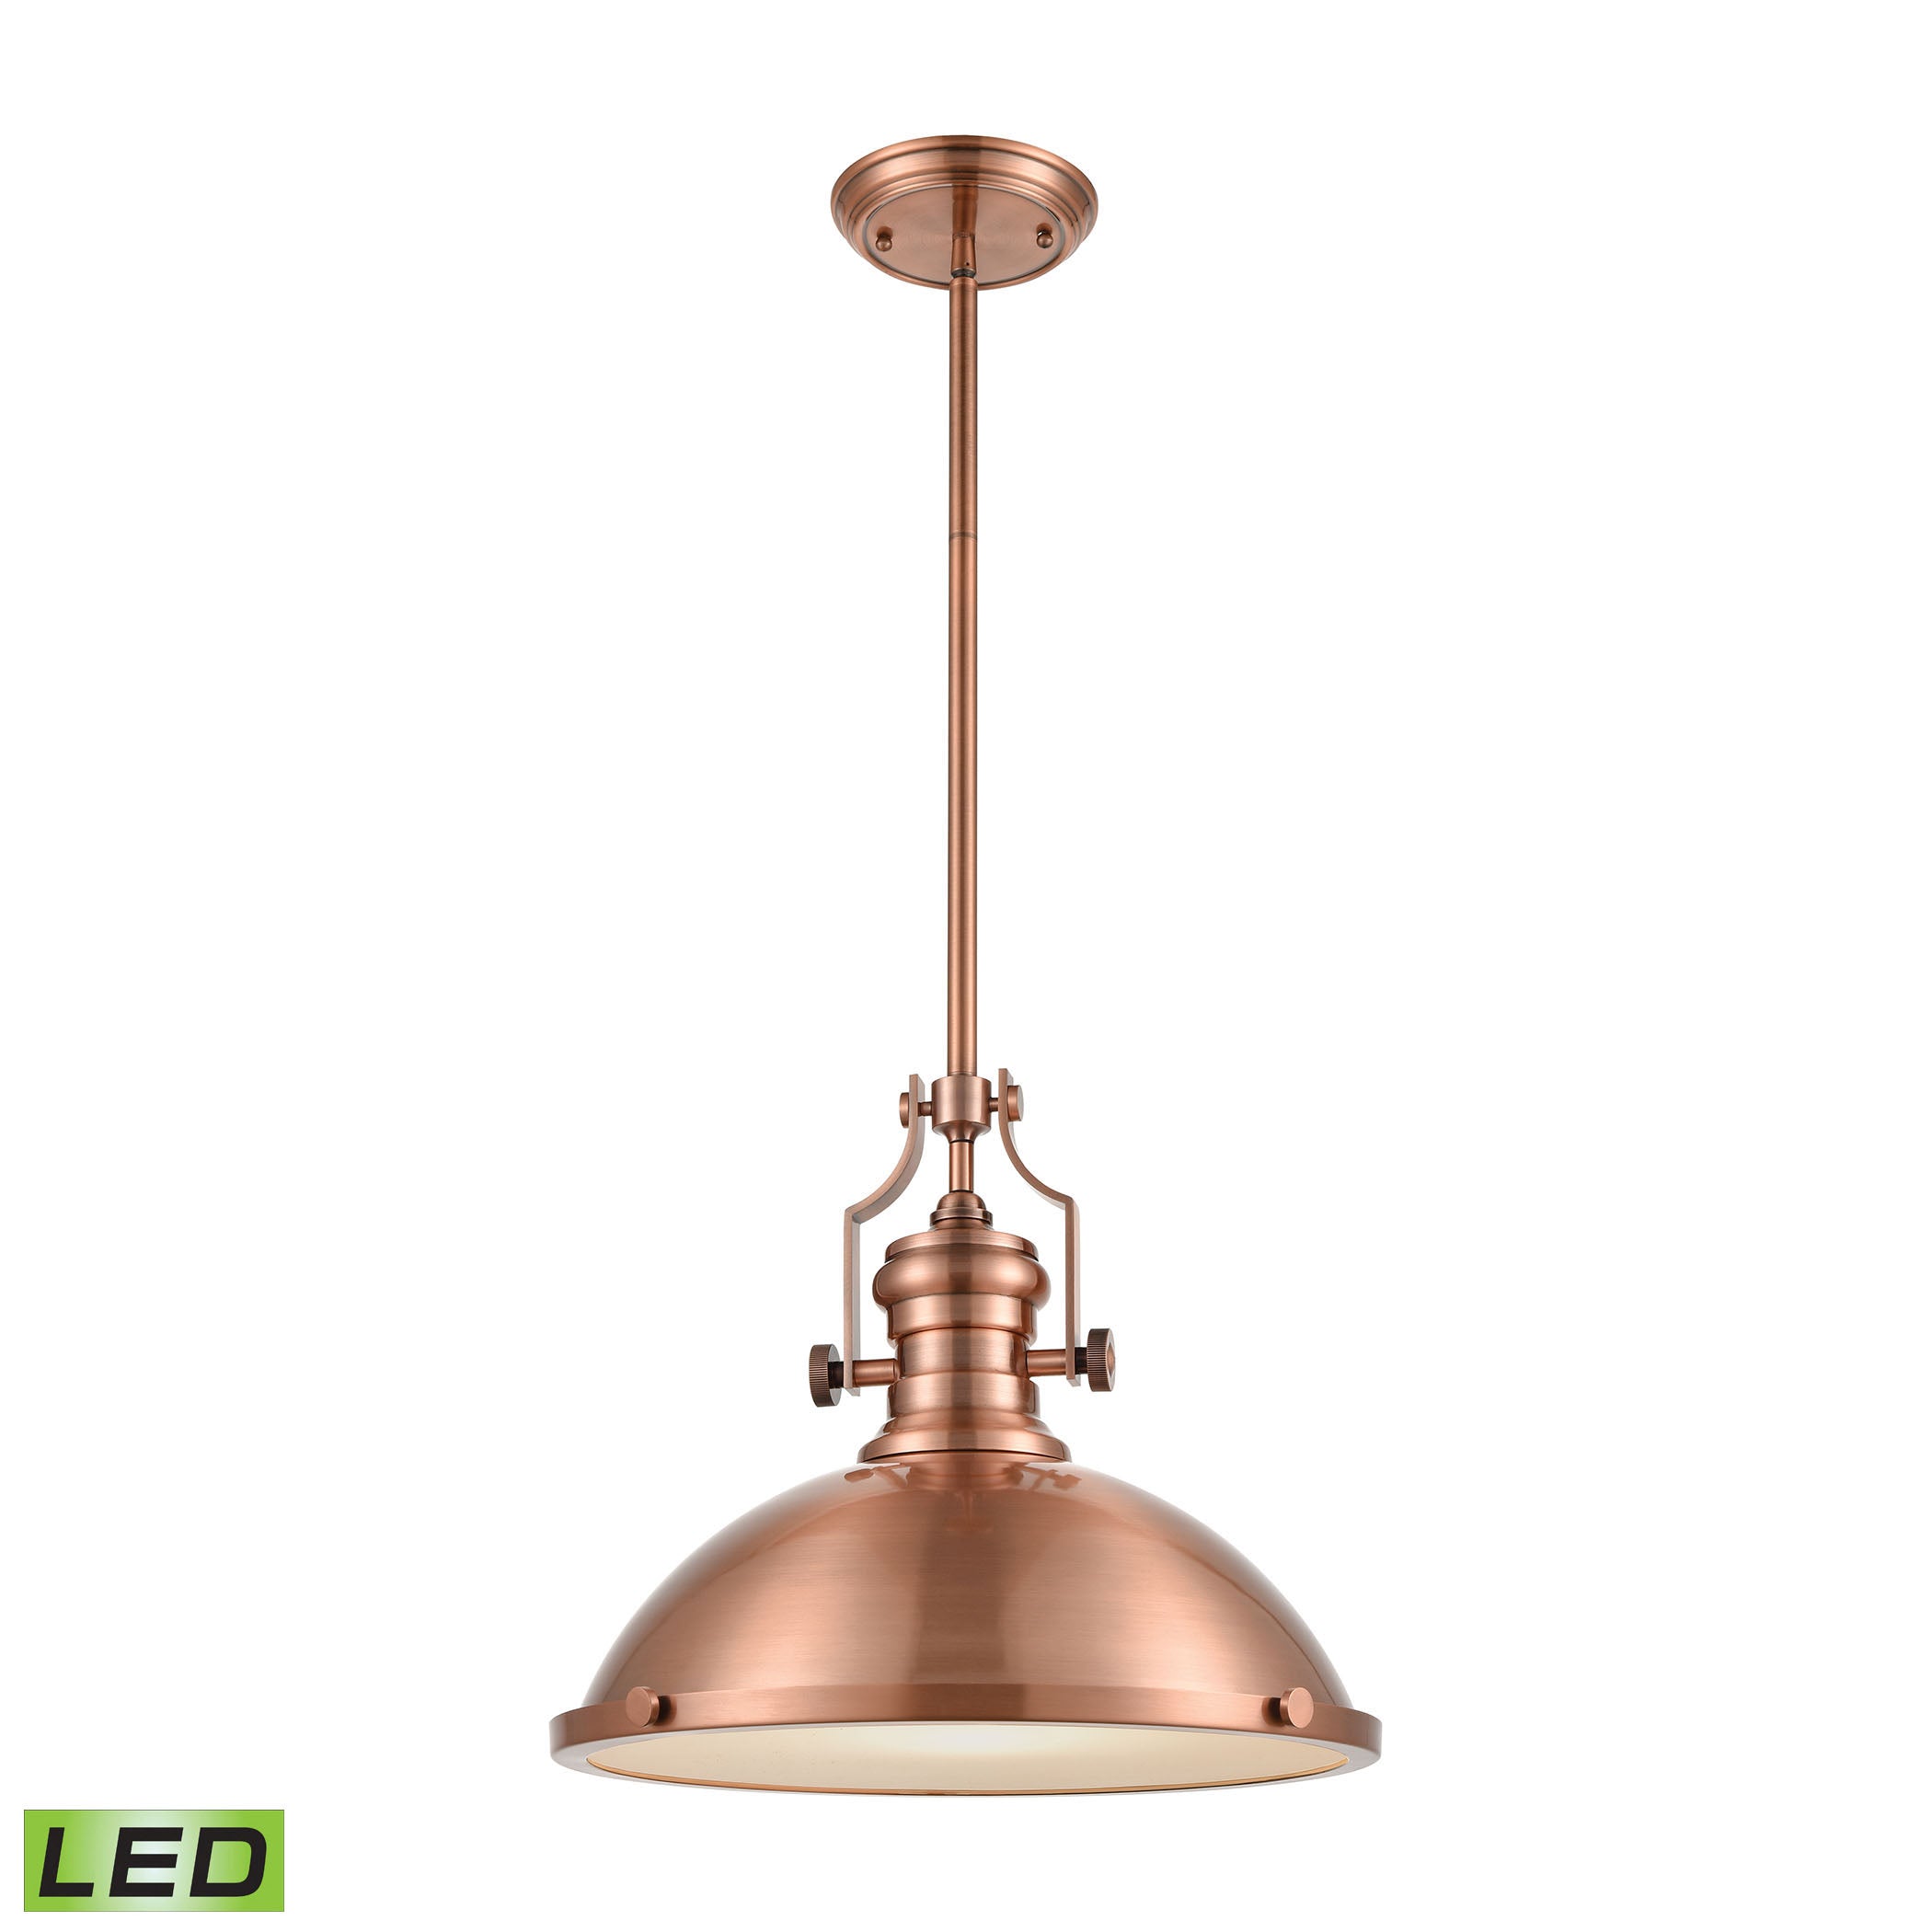 ELK Lighting 66148-1-LED Chadwick 1-Light Pendant in Antique Copper with Matching Shade - Includes LED Bulb